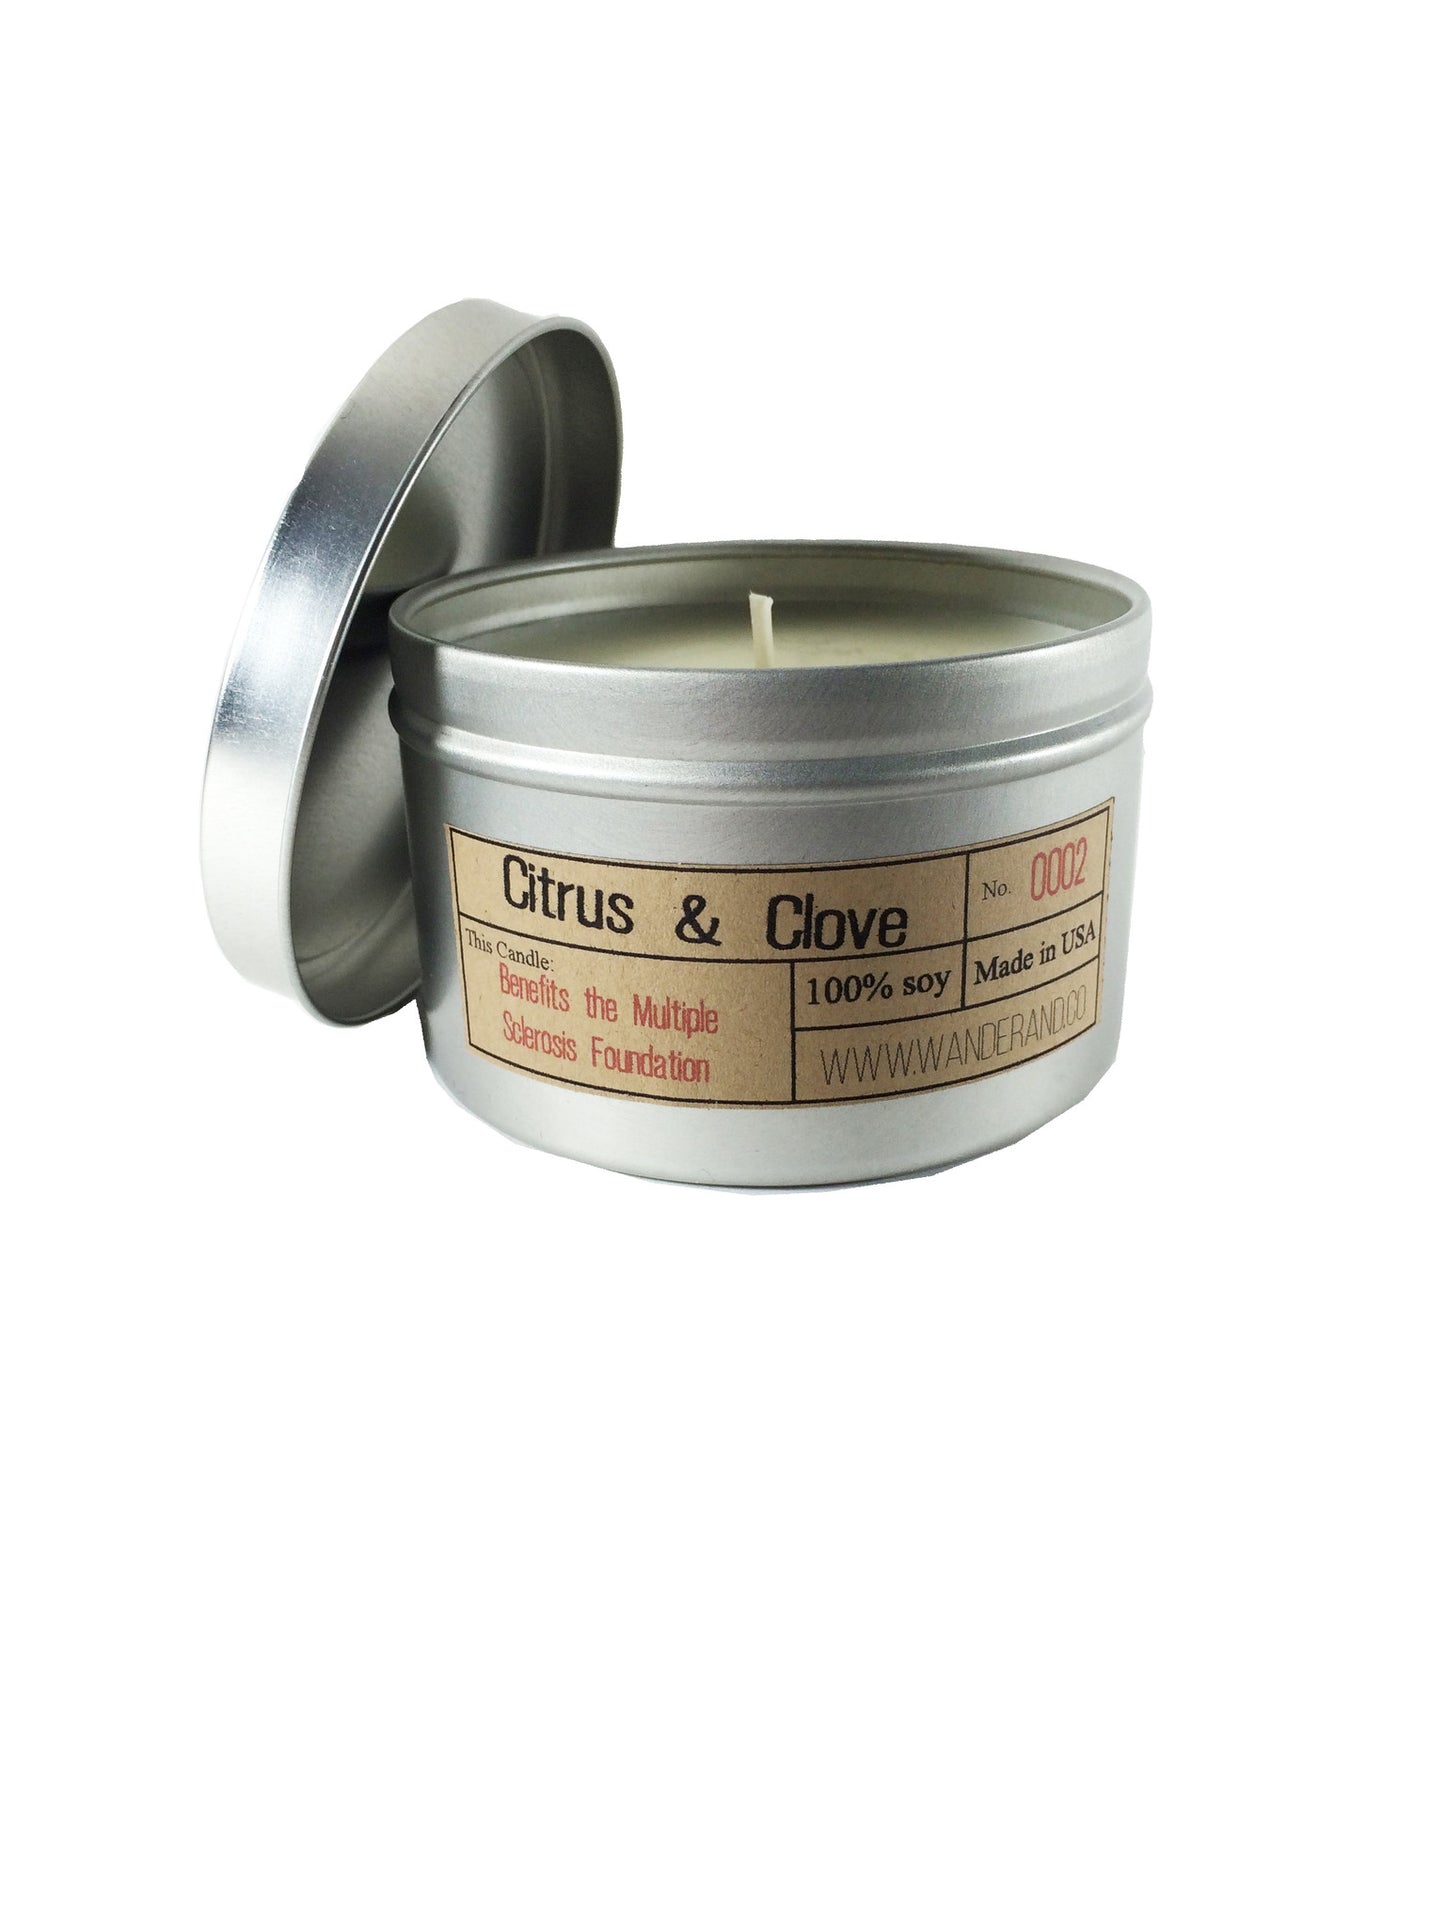 Wander & Co. "Citrus and Clove" Candle